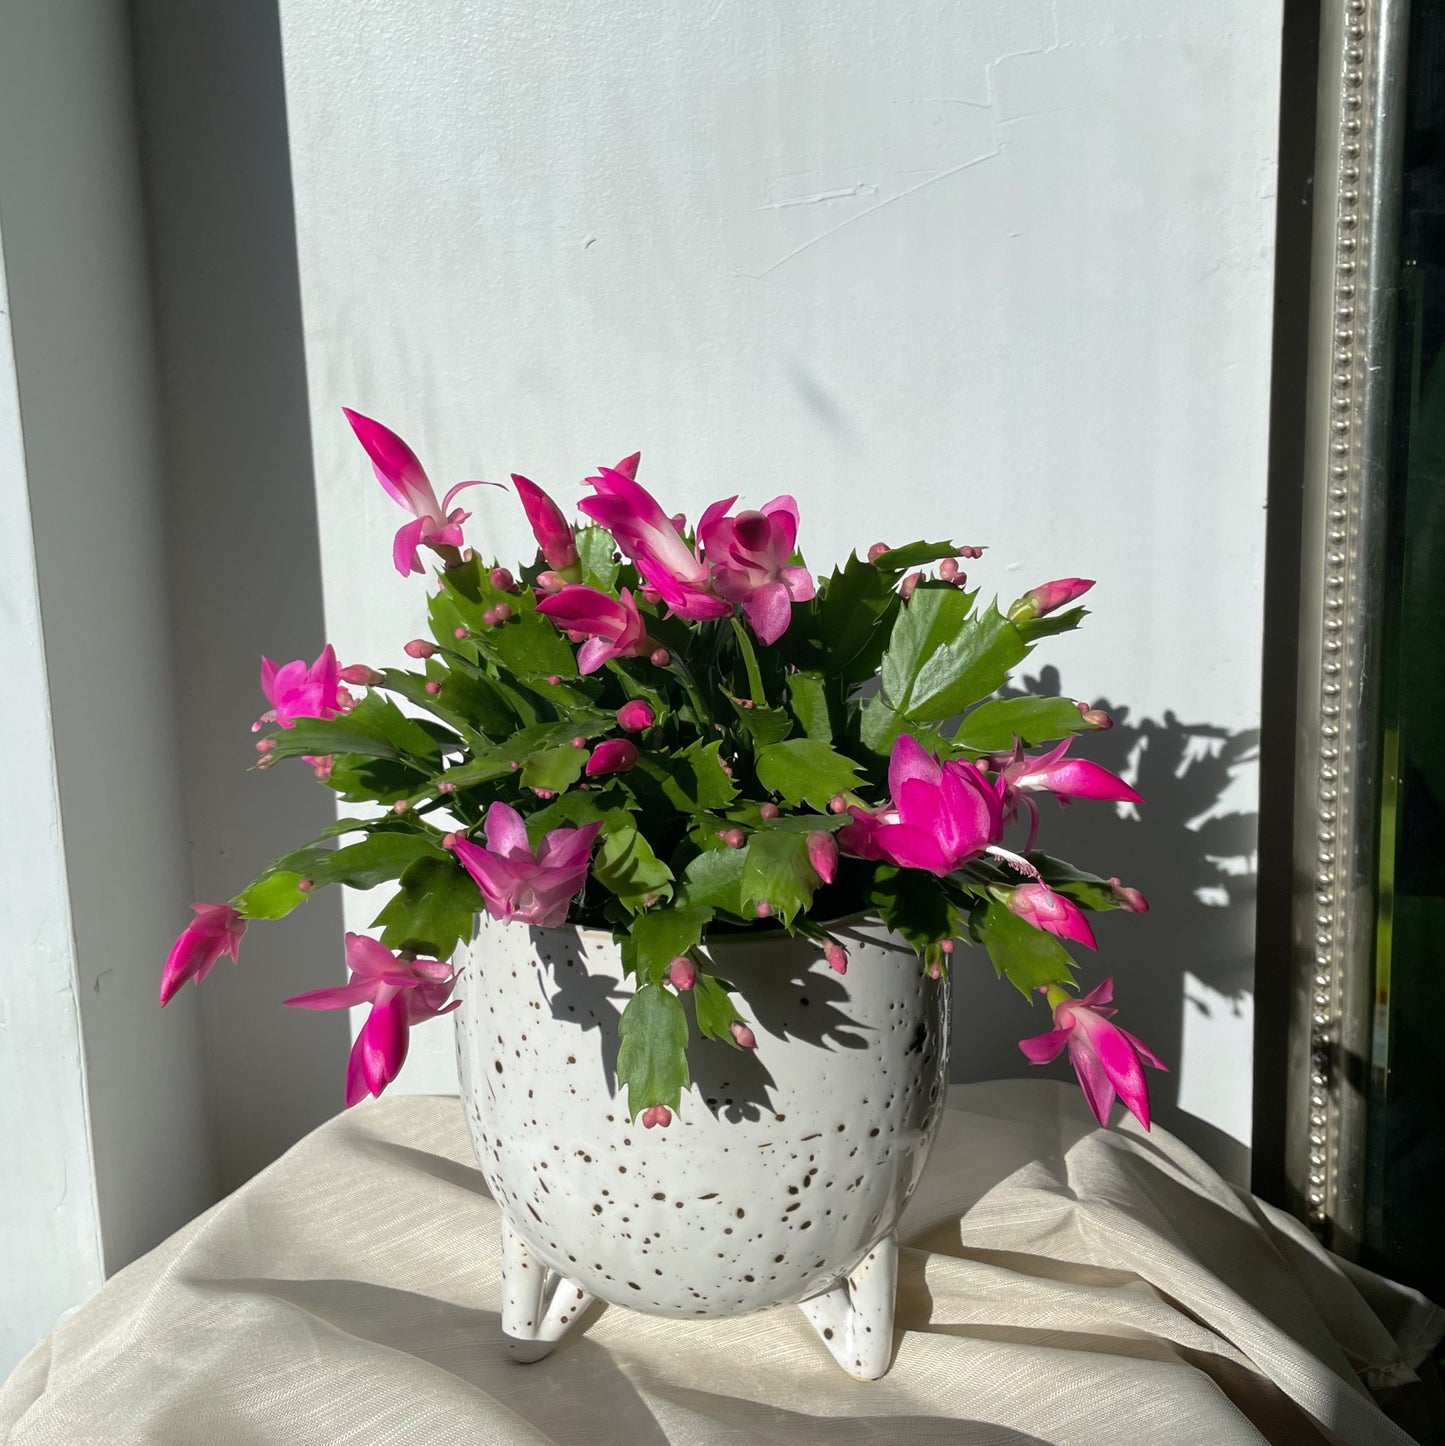 Hot pink Christmas cactus in ceramic pot, Toronto plant delivery, Toronto flower delivery